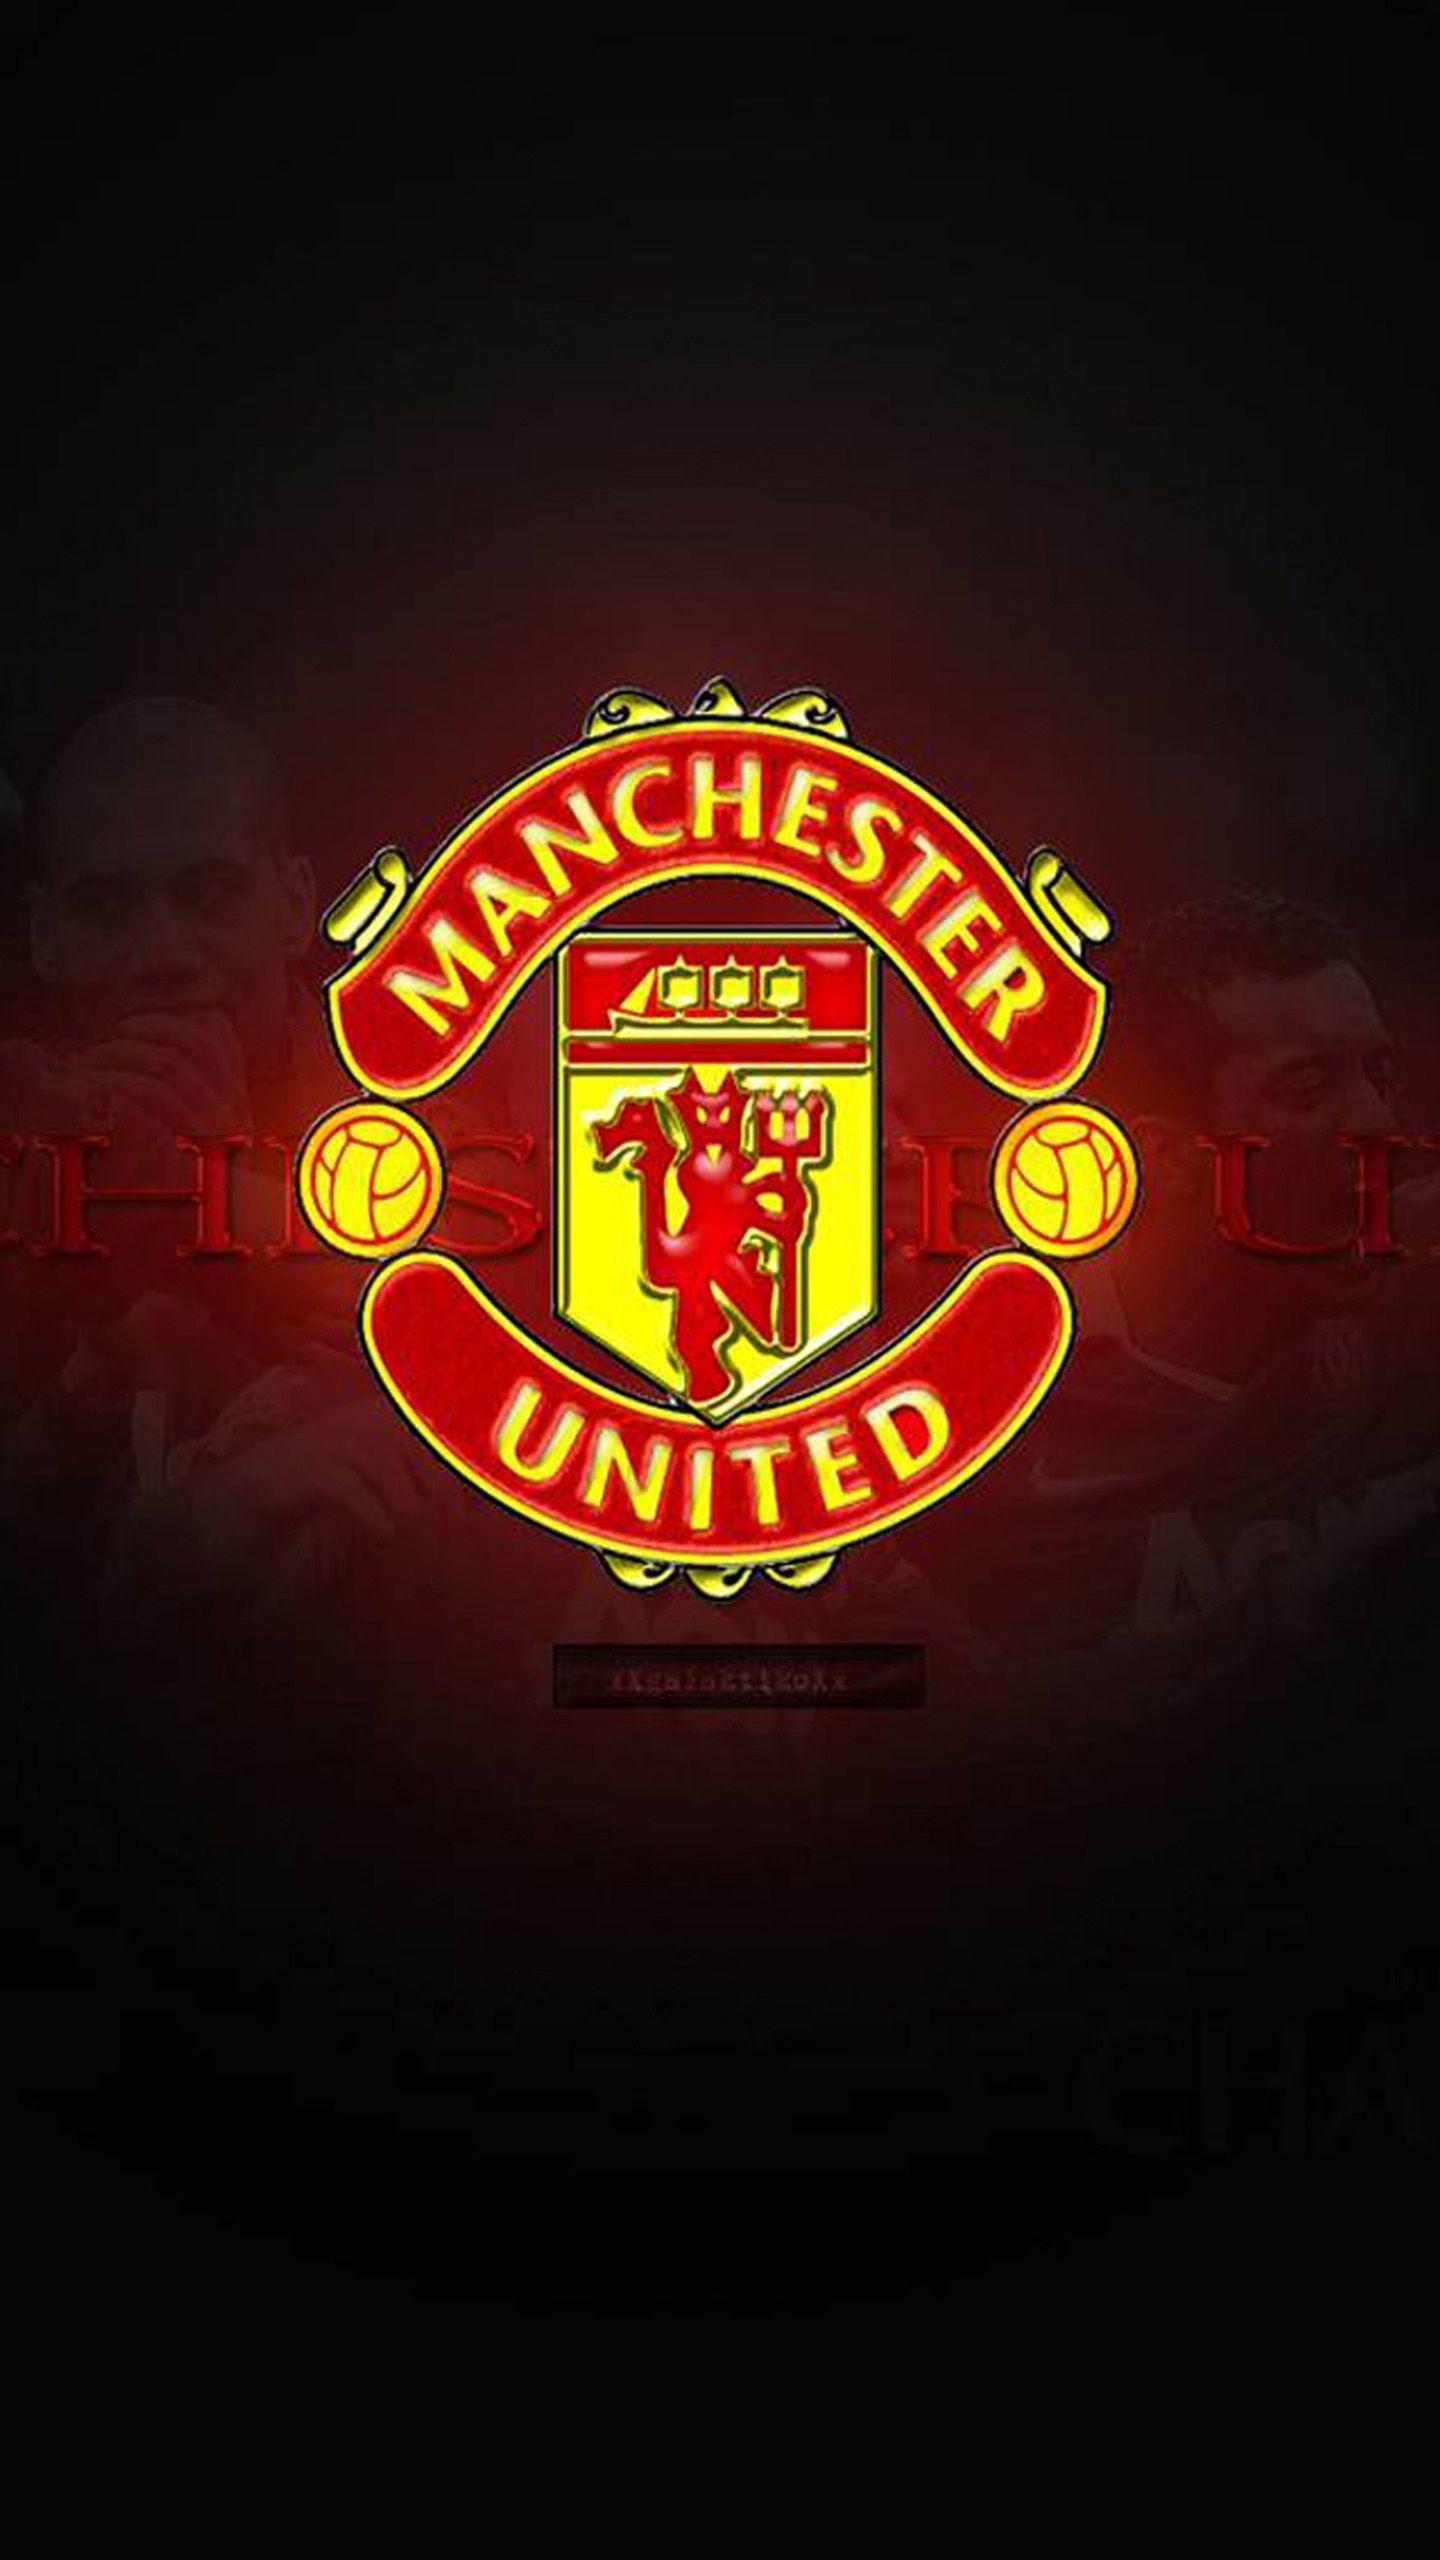 Manchester United 1 wallpaper for galaxy